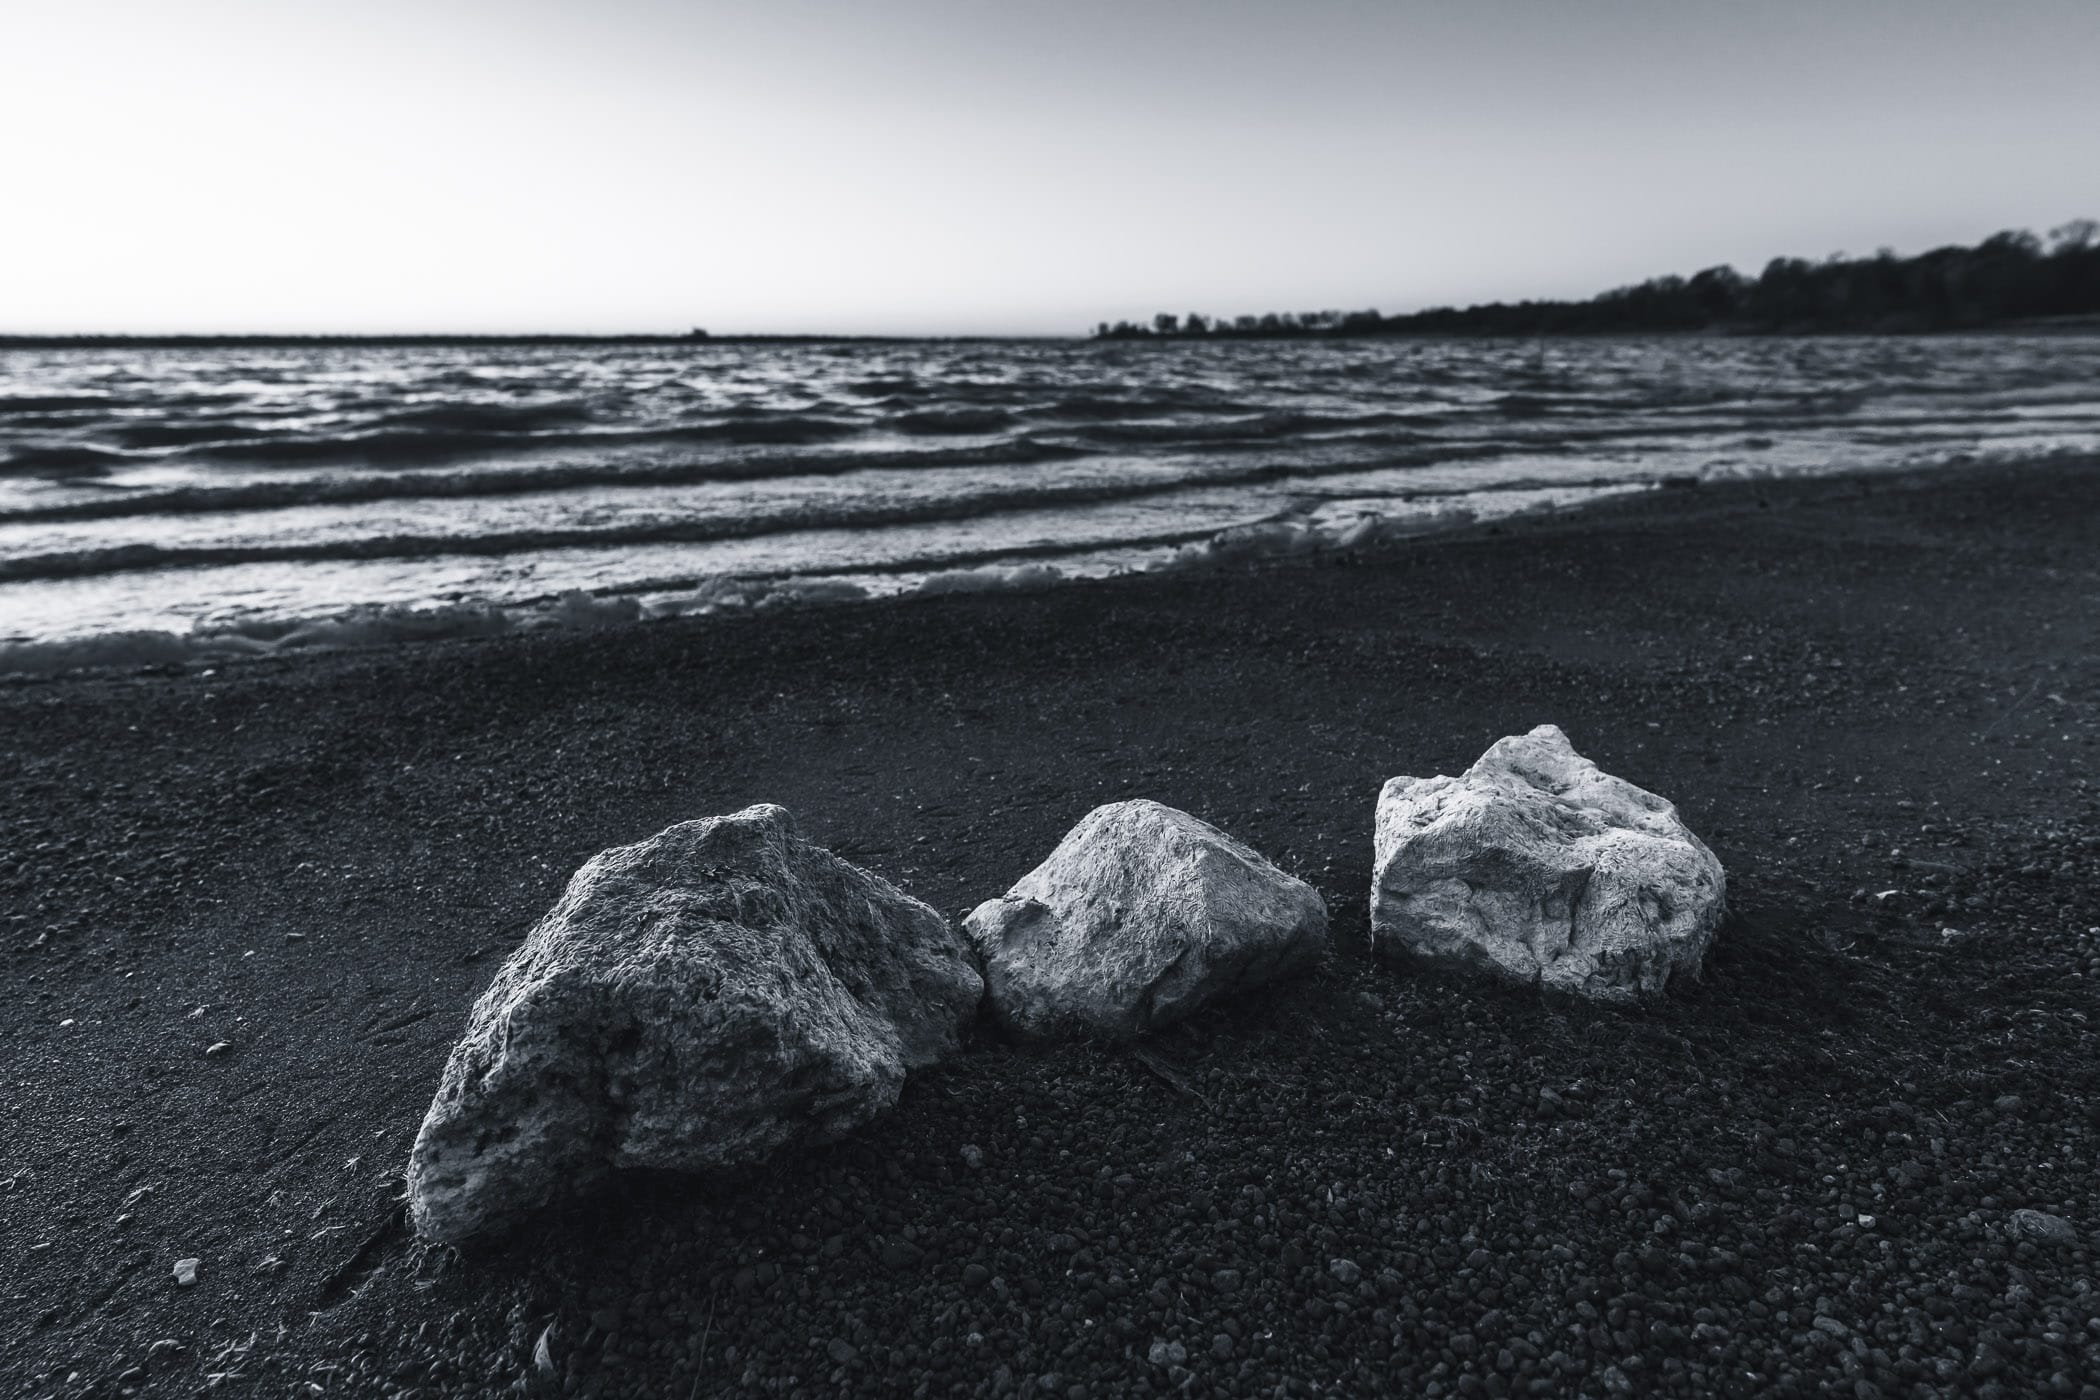 Rocks on the shore of North Texas' Lake Lavon.